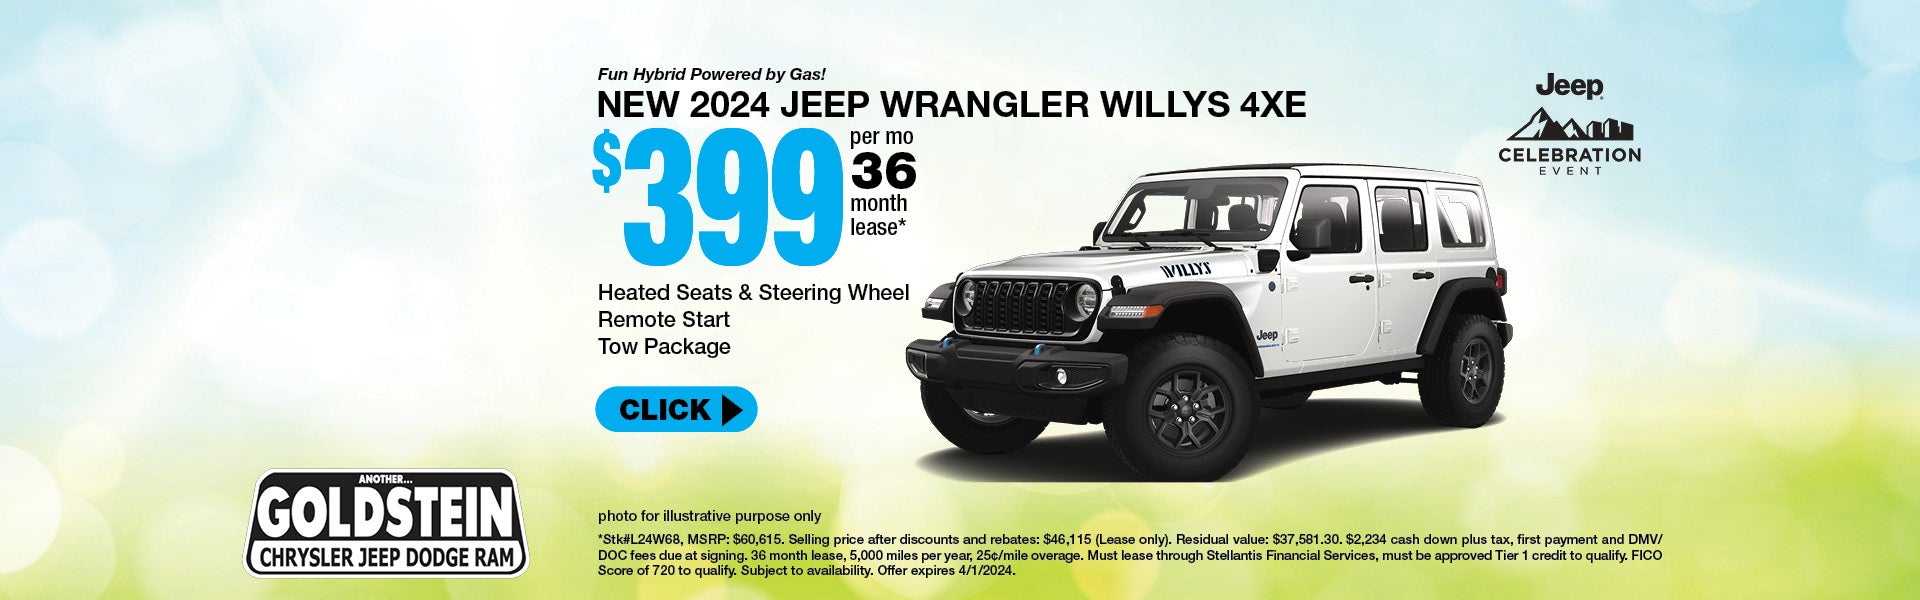 2024 Jeep Wranger Willy 